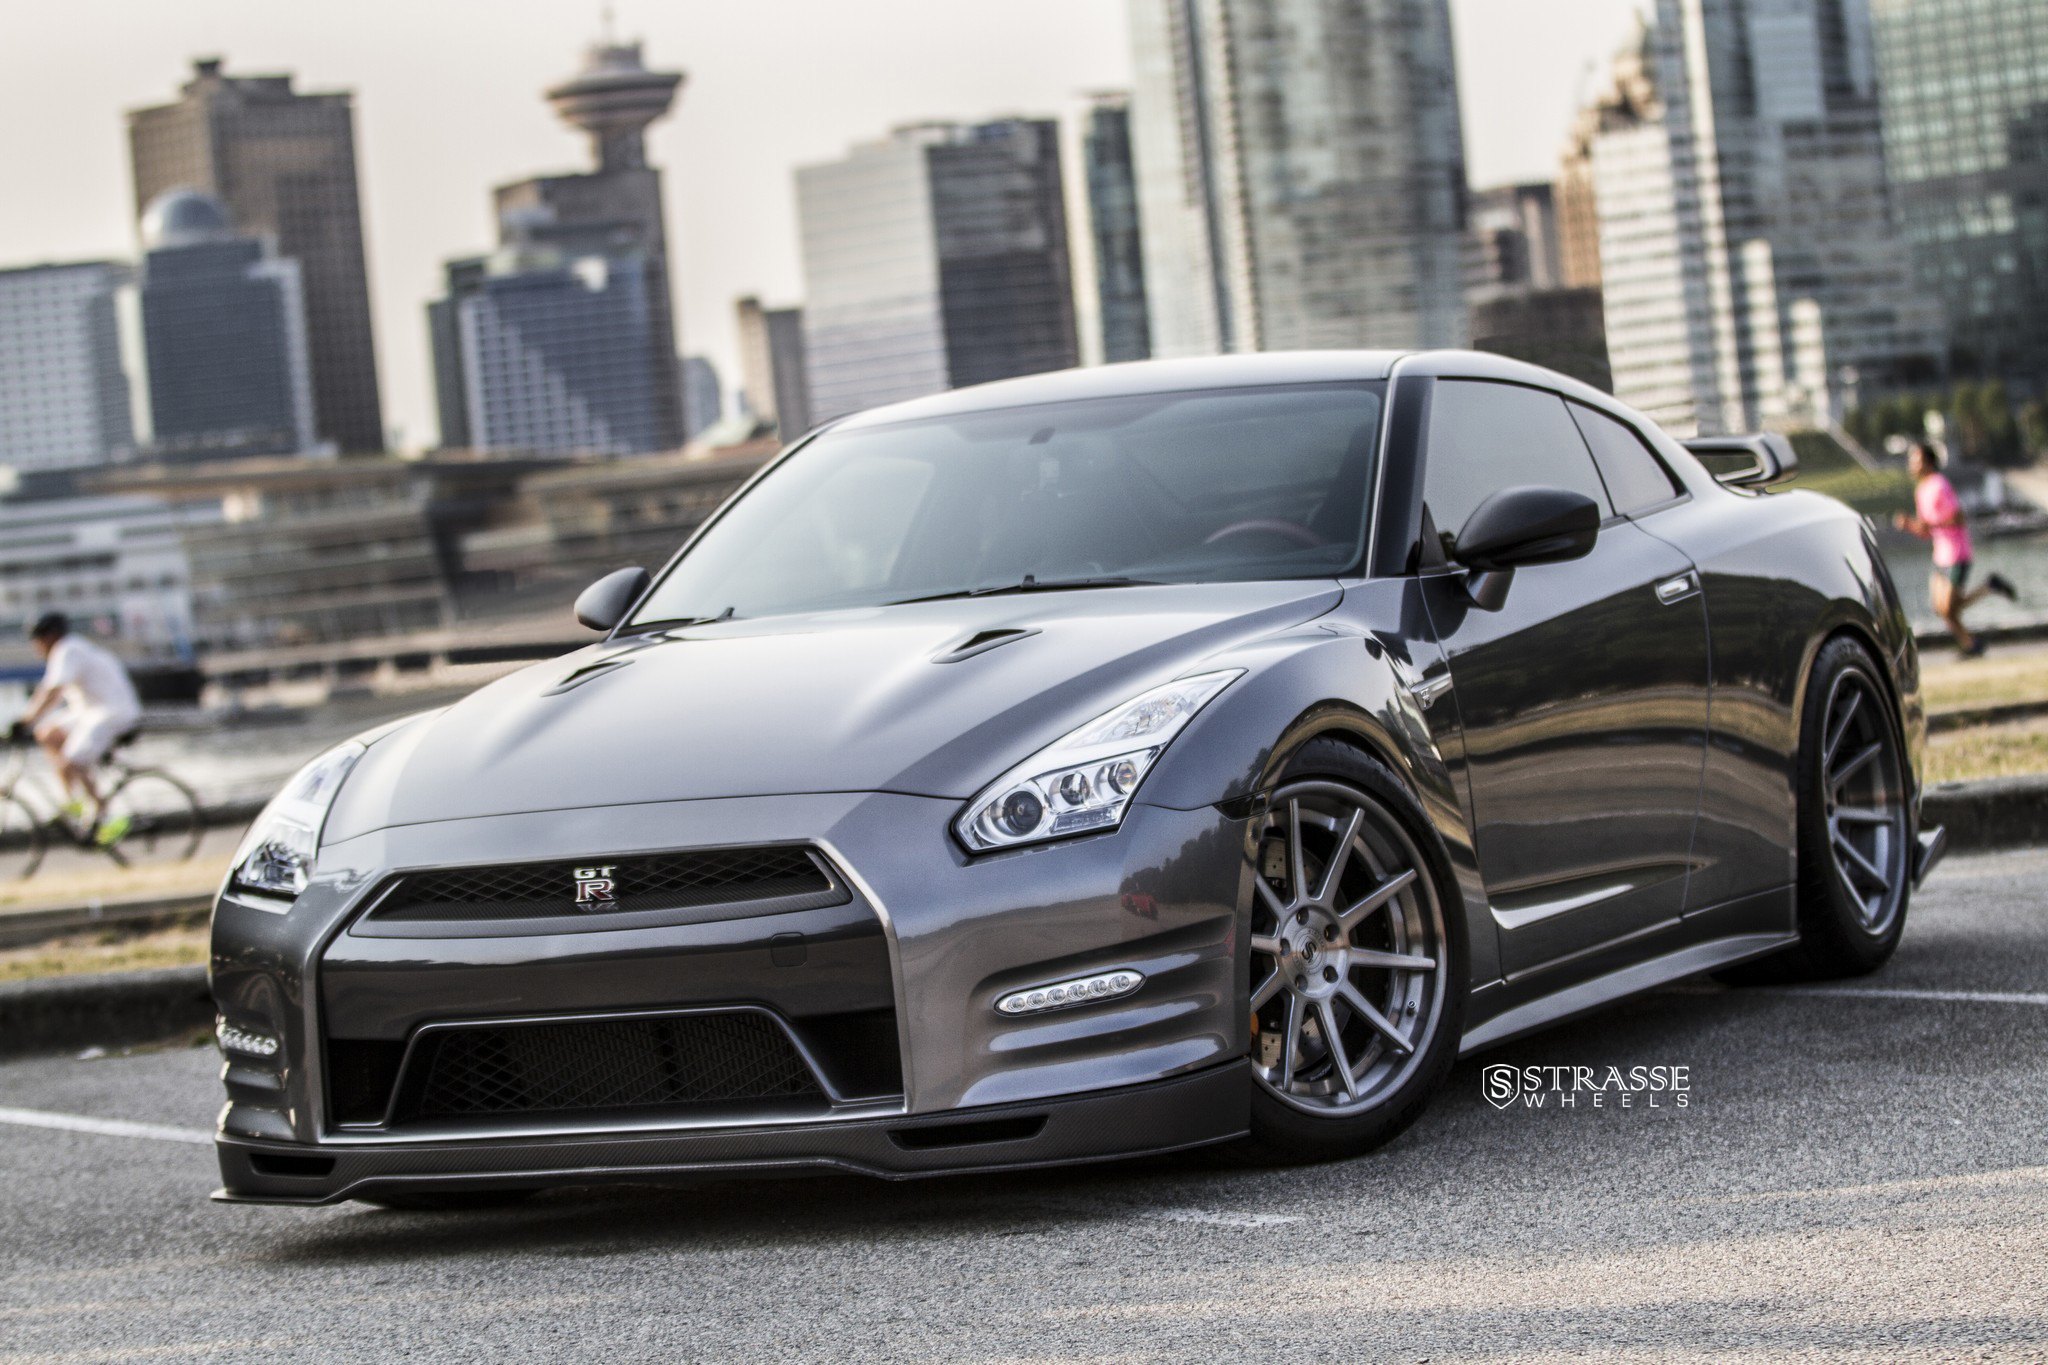 Custom Hood with Air Vents on Gray Nissan GT-R - Photo by Strasse Forged